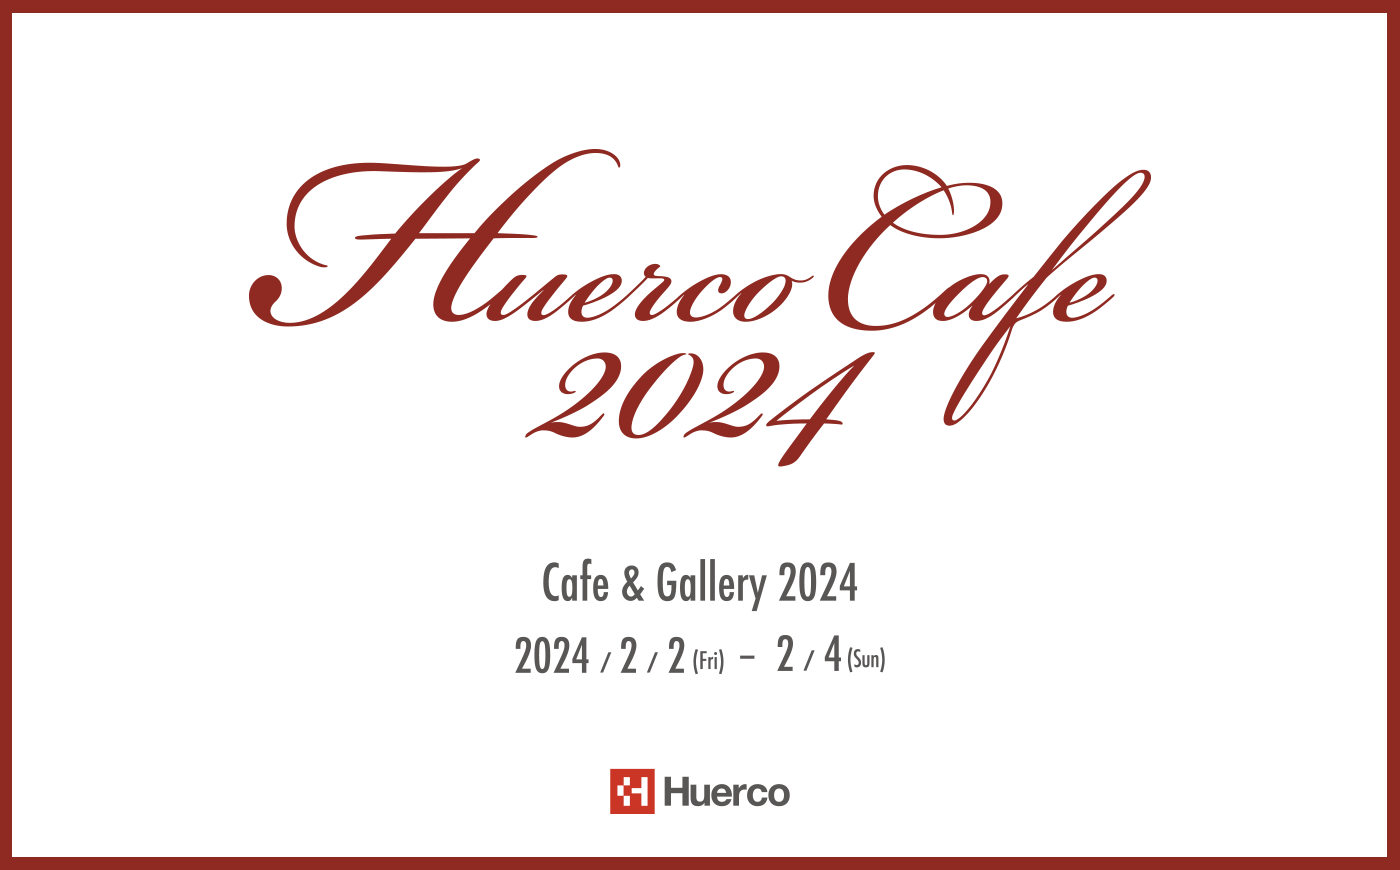 Huerco Cafe & Gallery 2024 開催のお知らせ